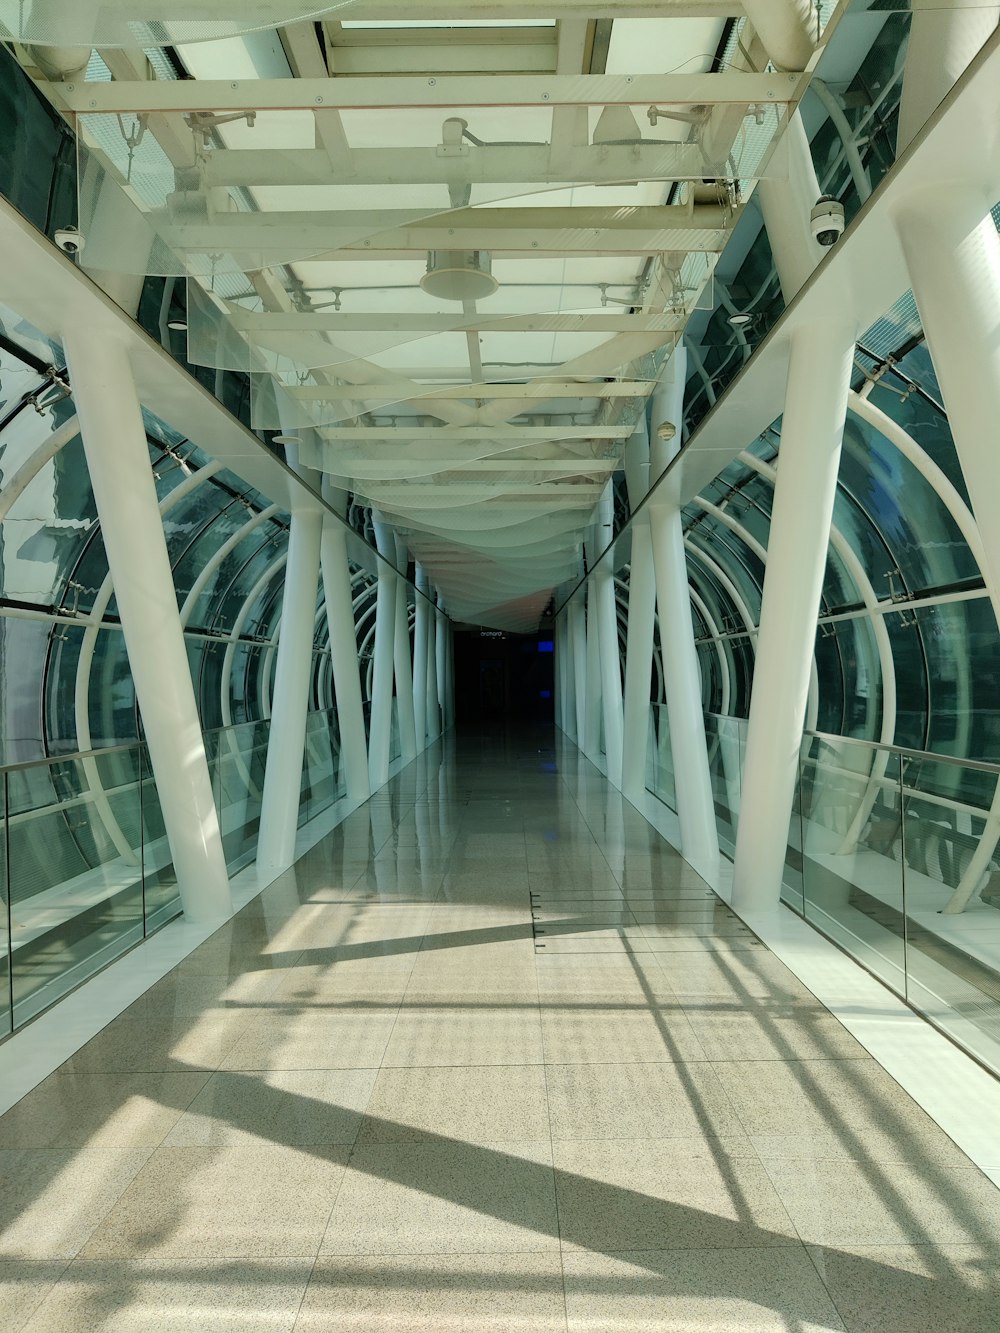 a long hallway with white columns and glass walls